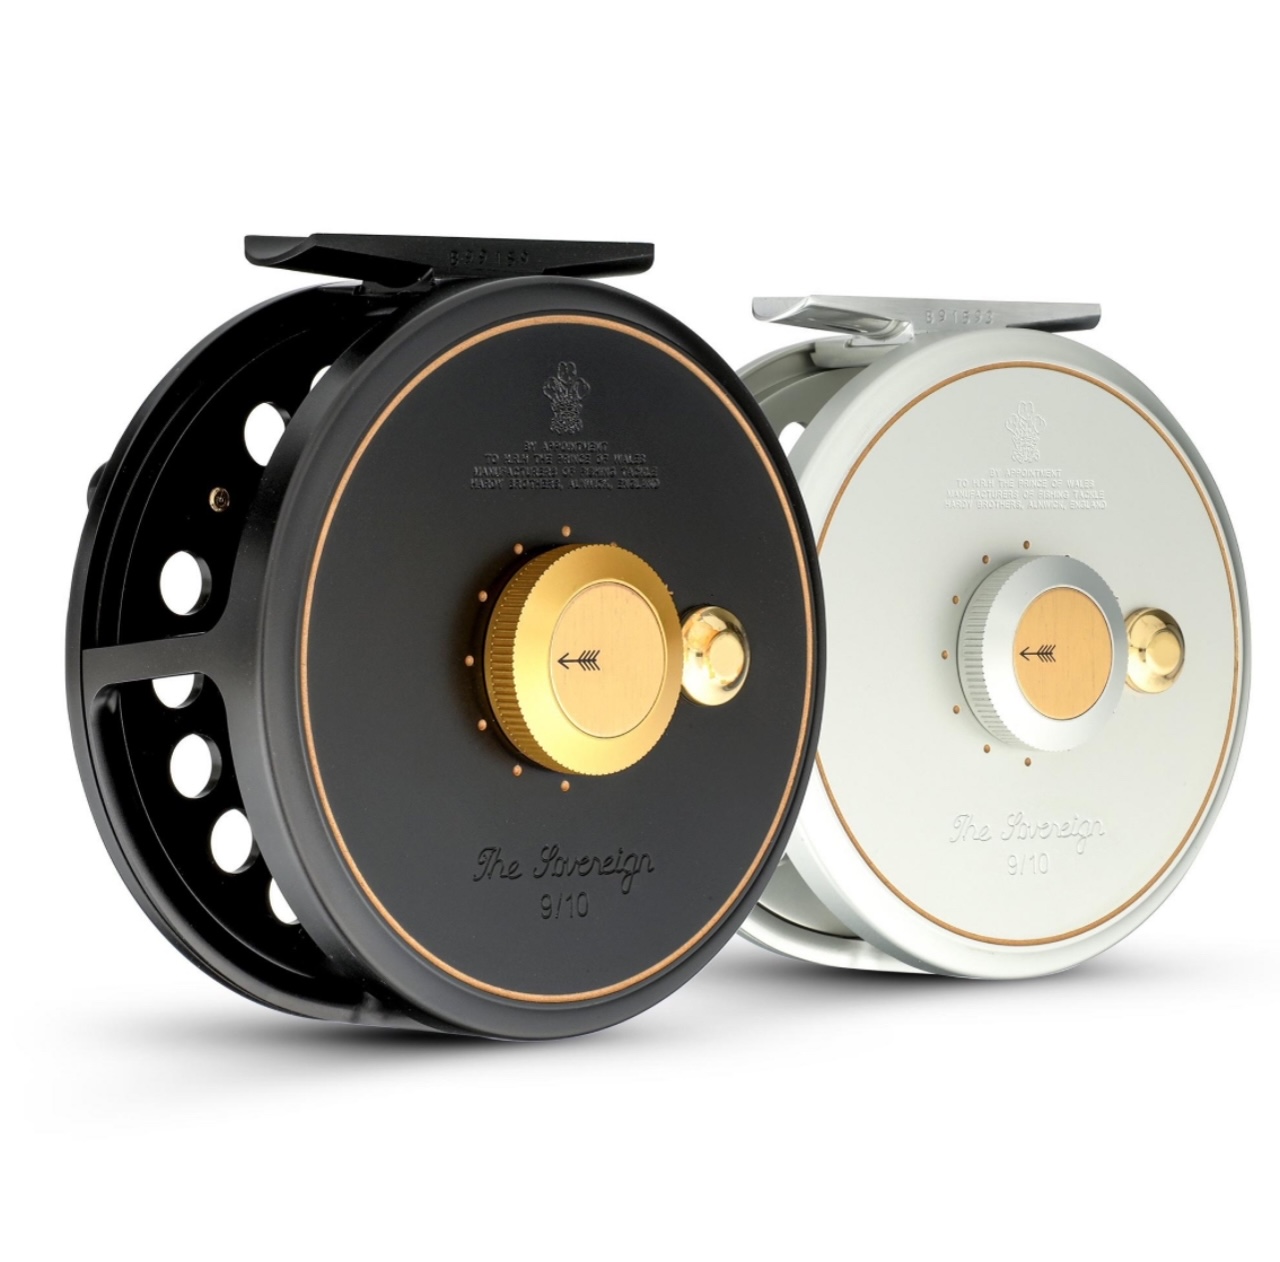 Hardy Sovereign Fly Reel - Spitfire - 5/6